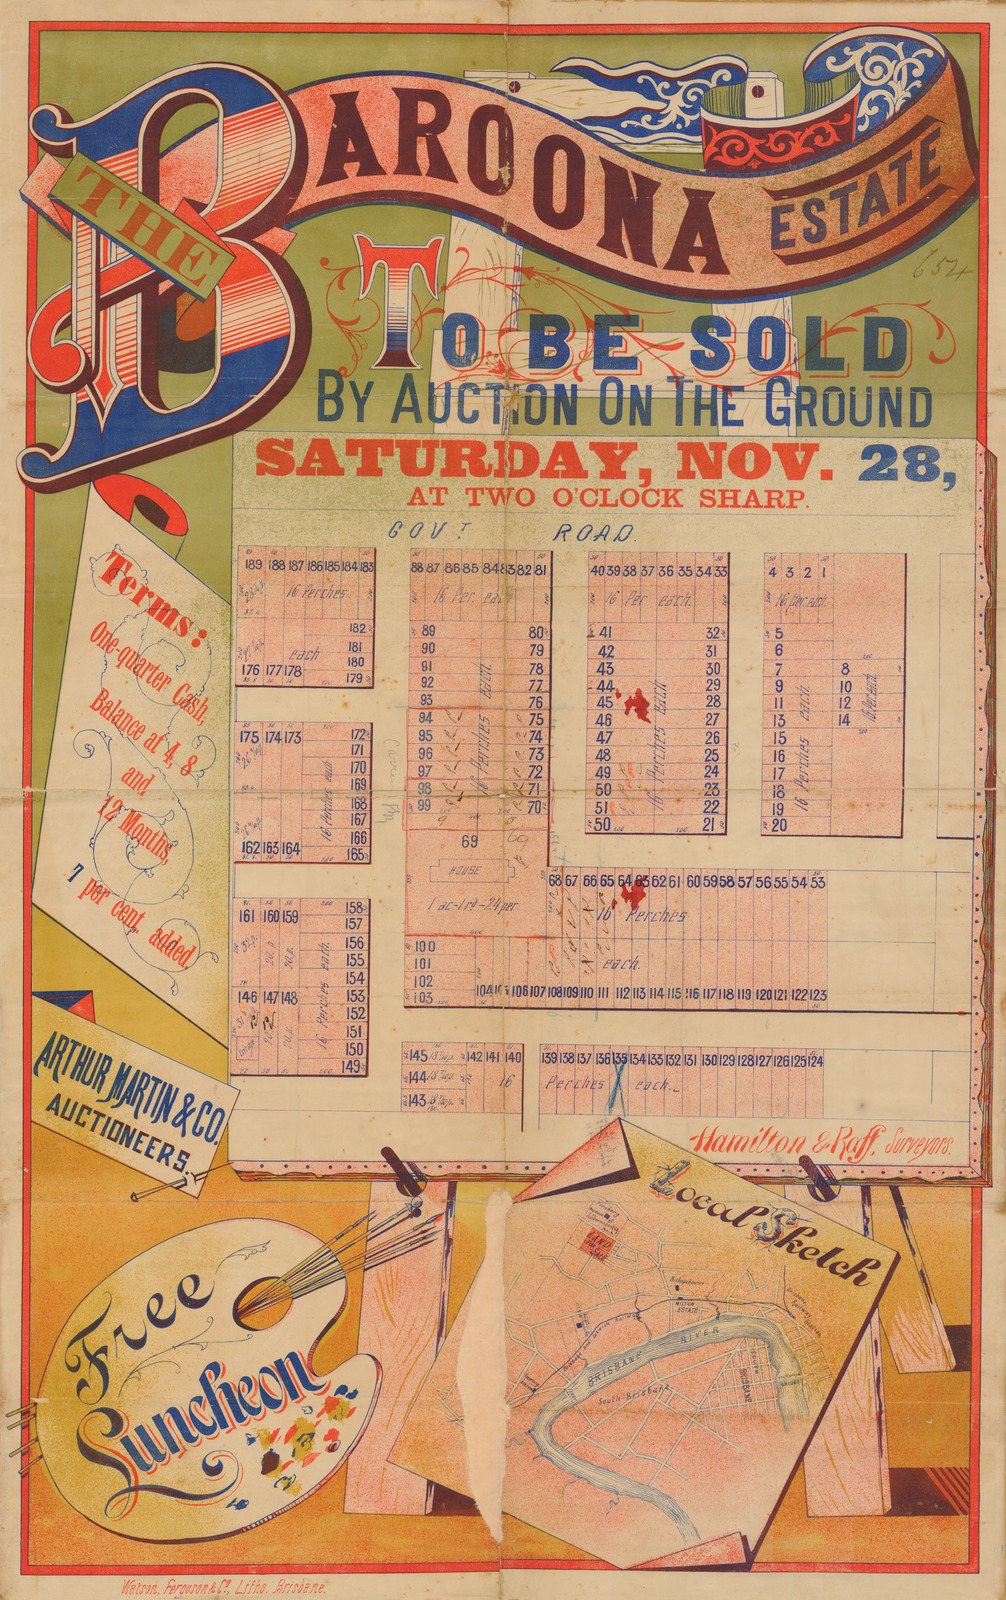 The Baroona Estate to be sold by auction on the ground Saturday, Nov. 28, at two o'clock sharp,1885.